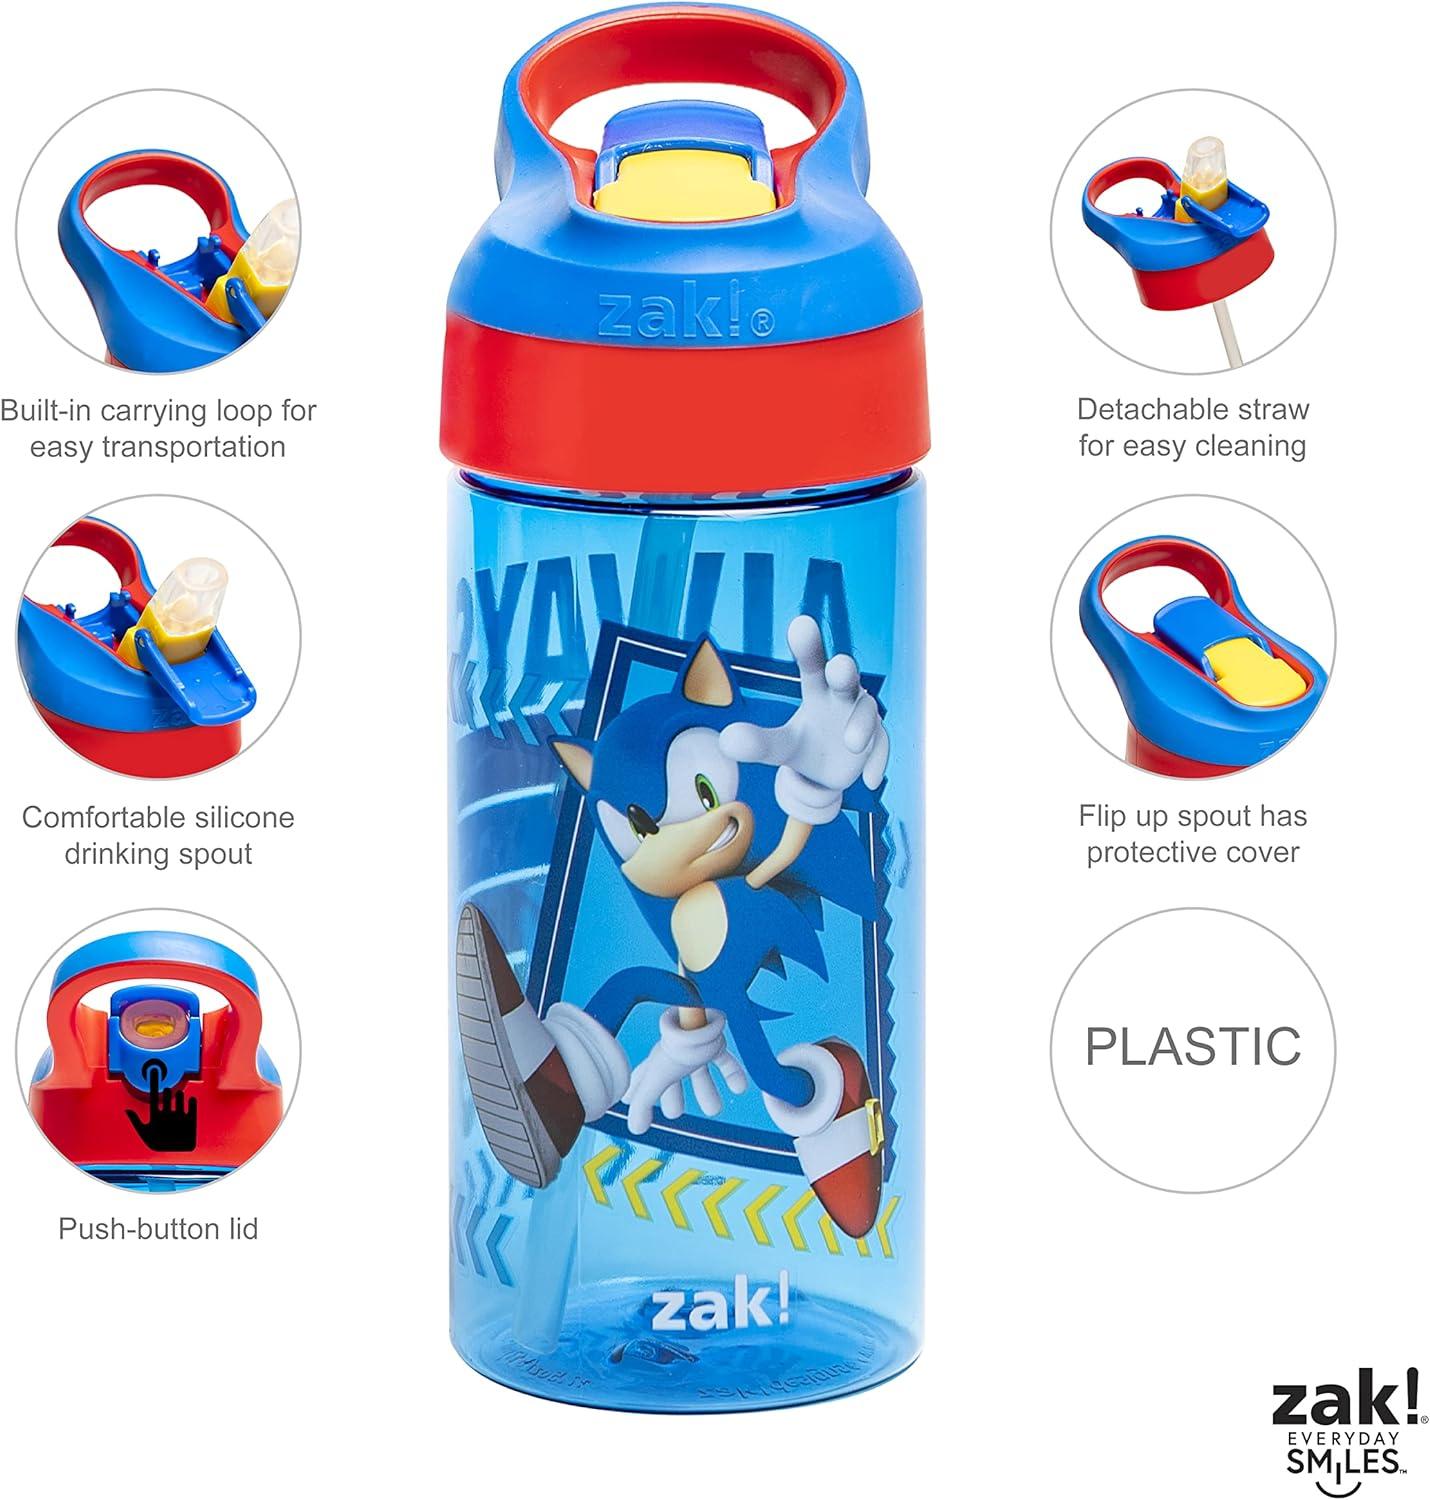 Zak Designs Kids Durable Plastic Spout Cover and Built-in Carrying